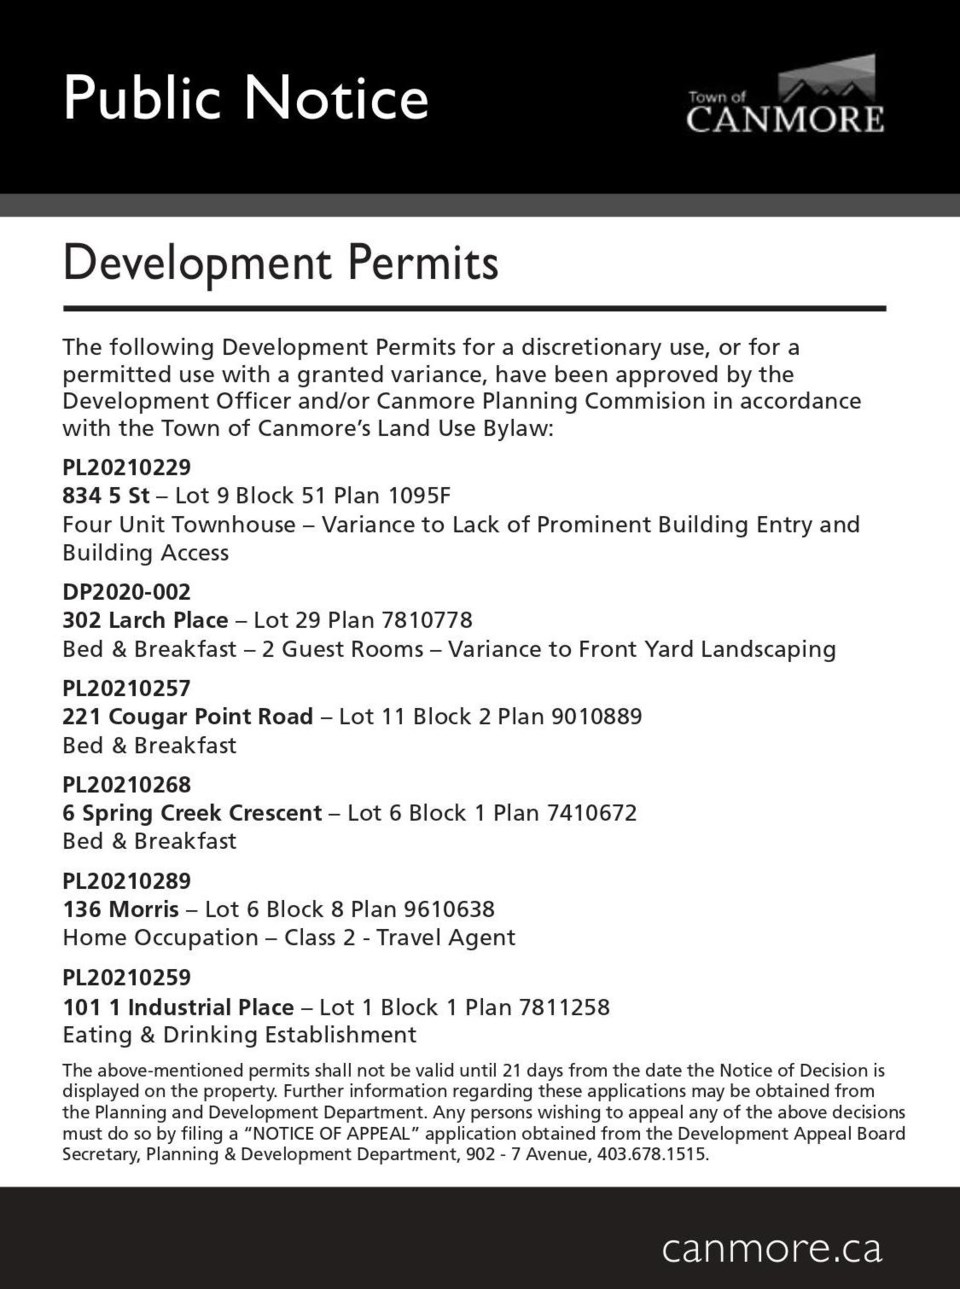 PUBLIC NOTICE – Town of Canmore development permits – August 26, 2021